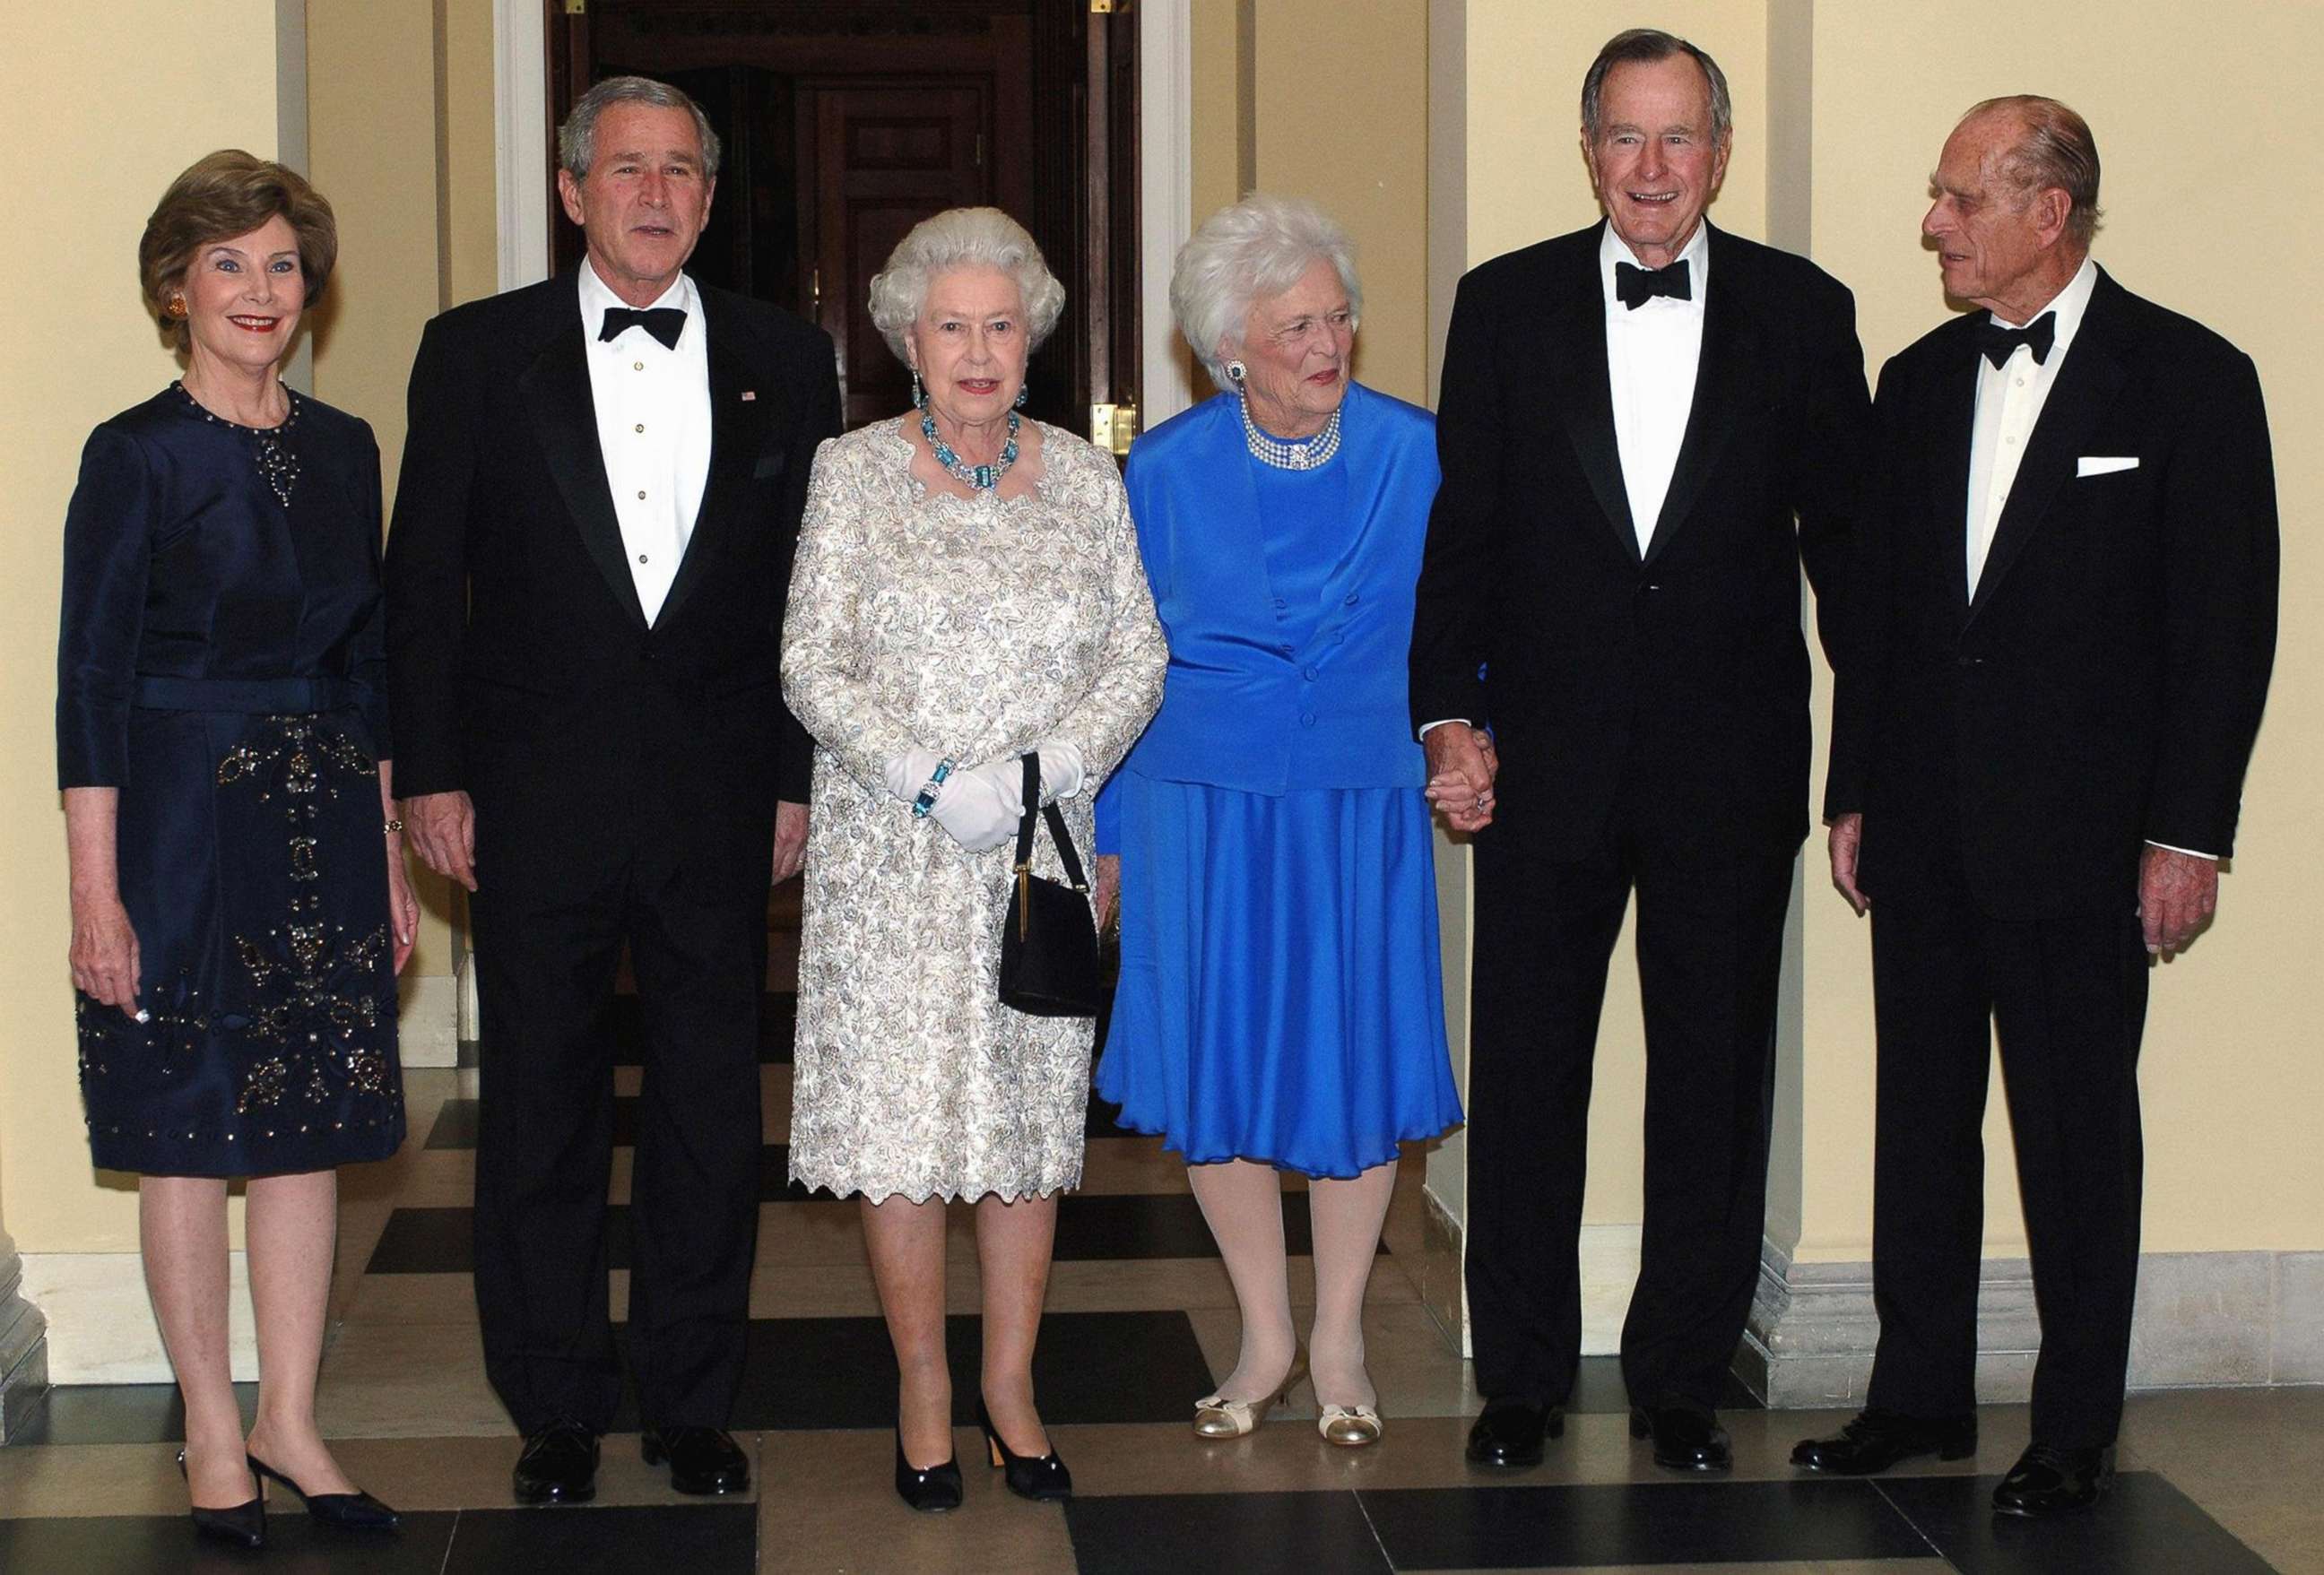 PHOTO: Britain's Queen Elizabeth II and the Duke of Edinburgh, right, stand for a group photo with President George Bush, his wife Laura, as well as his father and former President, George Bush Senior and wife Barbara in Washington, May 08, 2007.